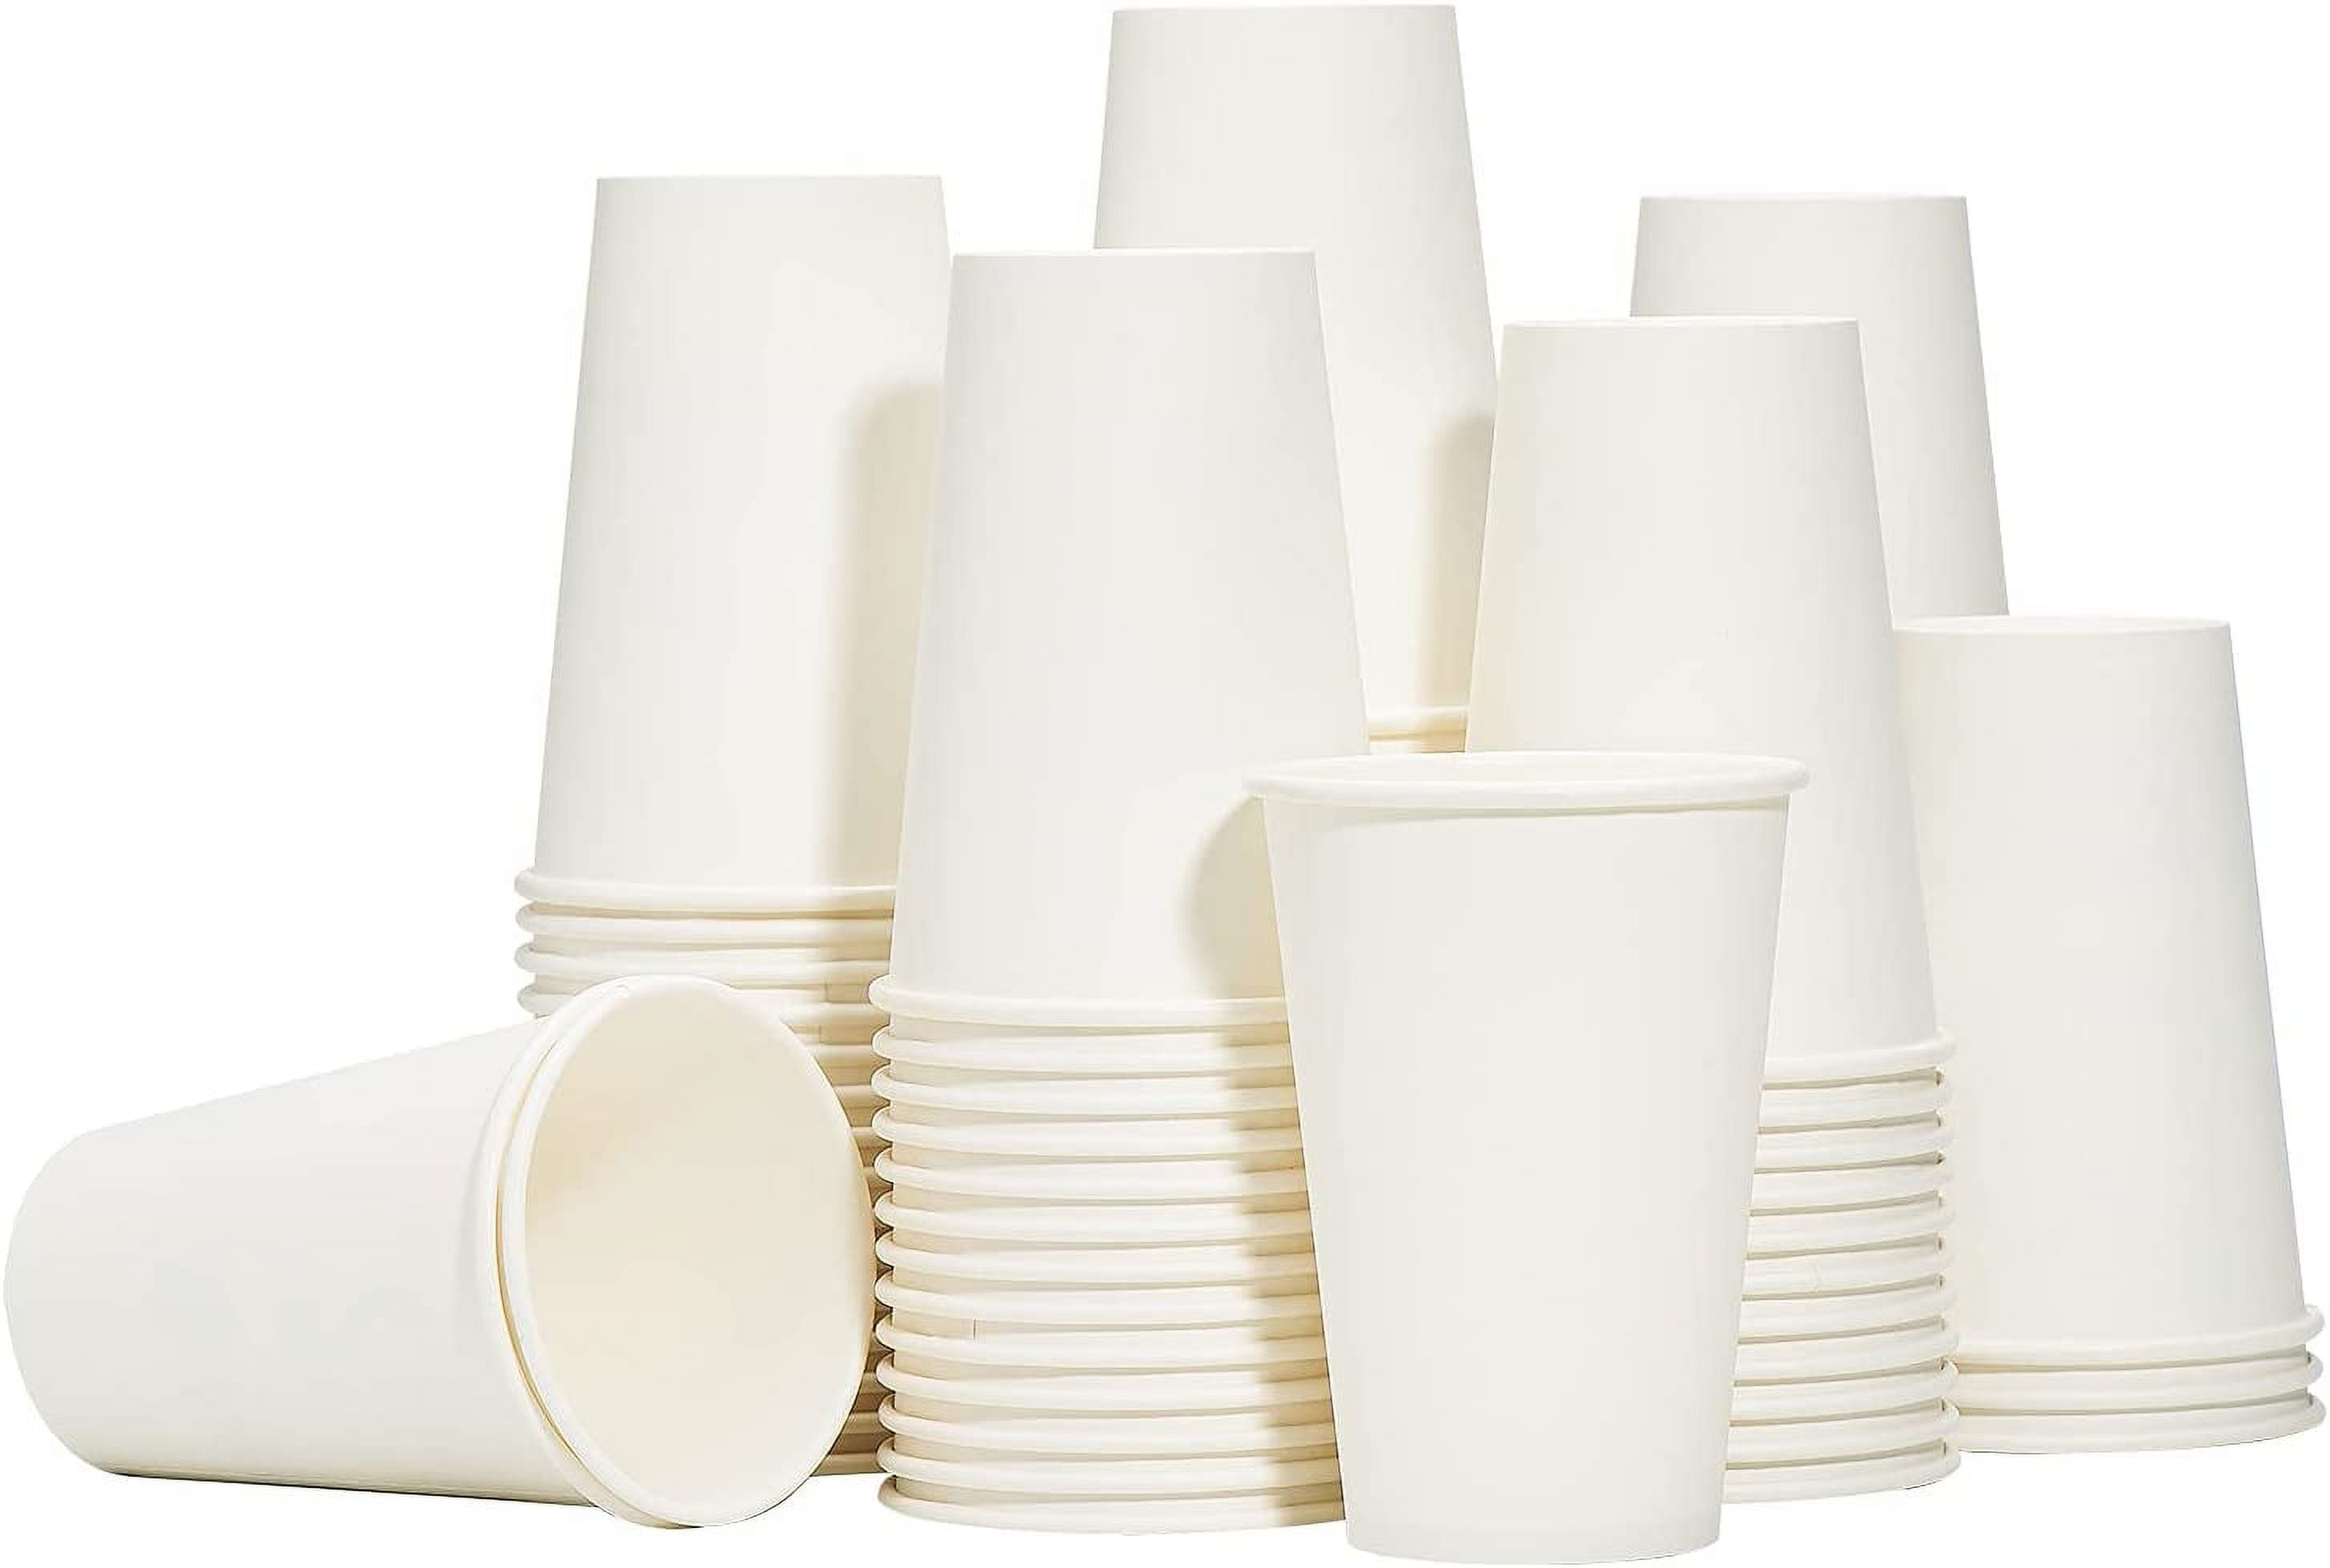 Comfy Package Small Paper Cups 3 Oz White Disposable Cups for